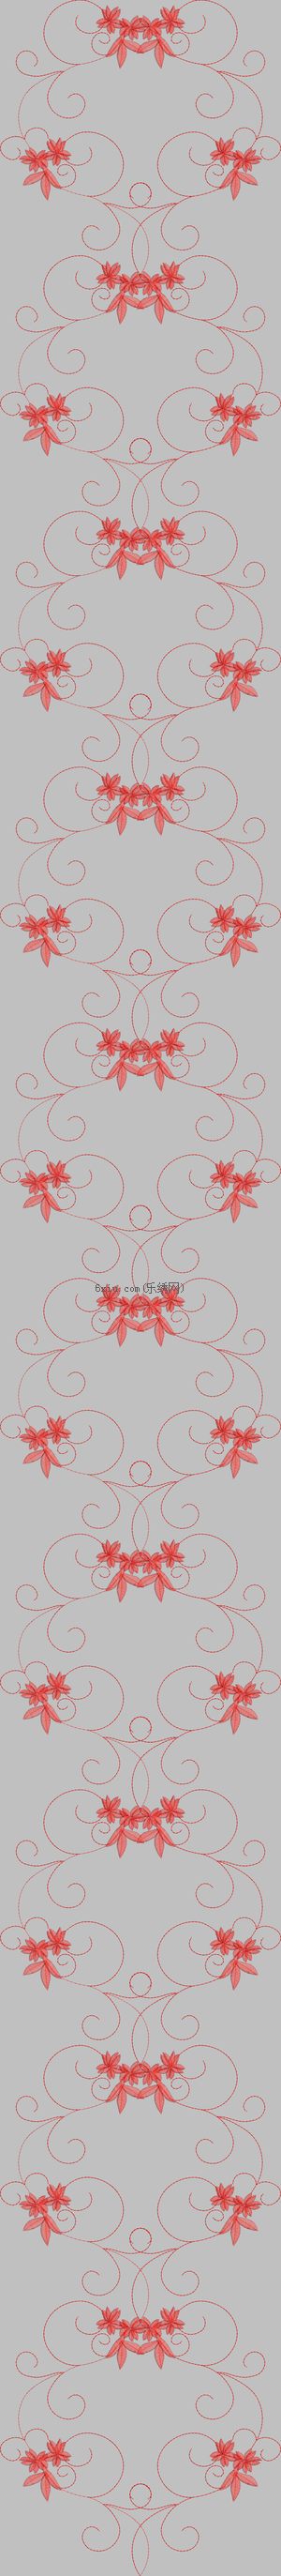 Wire netting european-style curtain embroidery pattern album